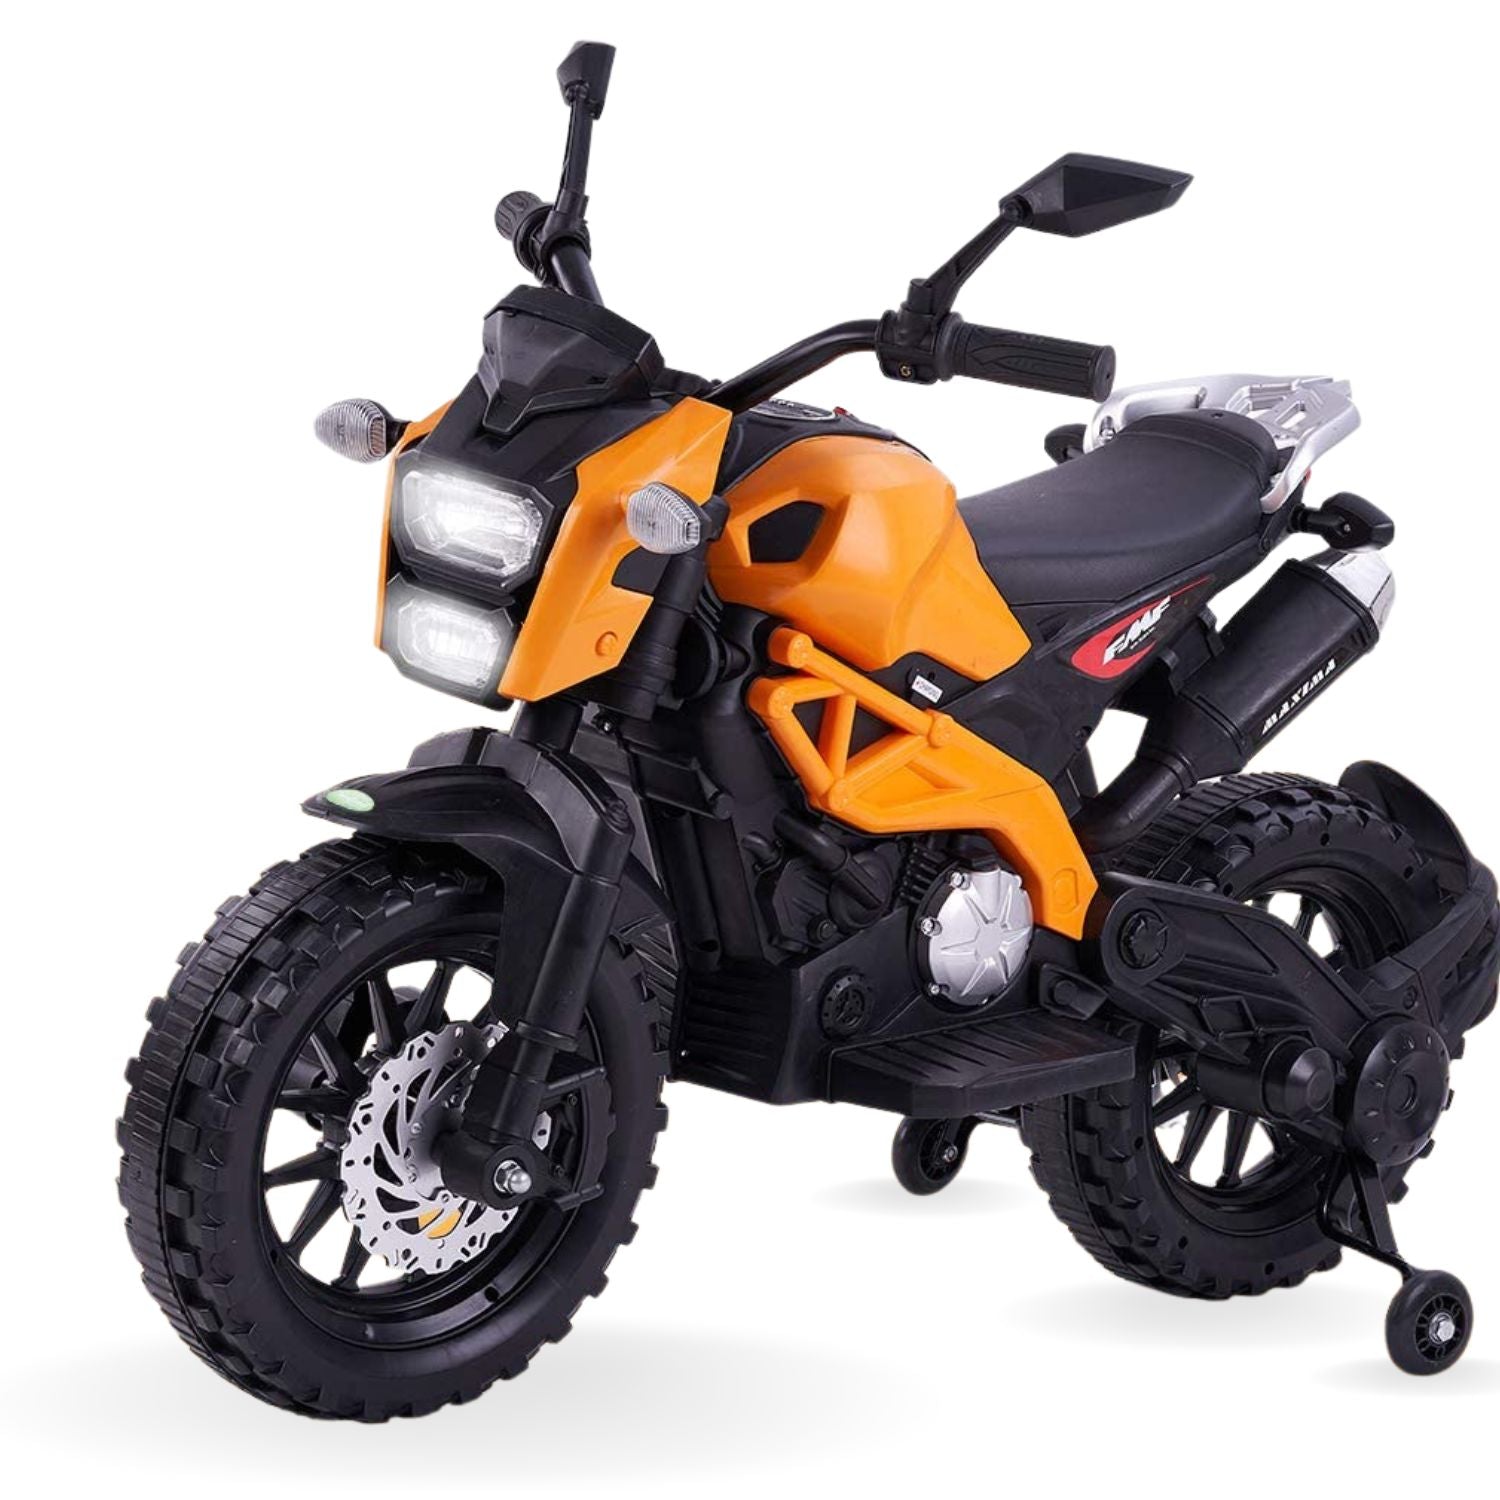 Baby Moo Electric Ride-on Bike for Kids | Battery-Powered Toy with LED Lights, Music, and USB Port | Battery Operated Bike - Orange - Baby Moo